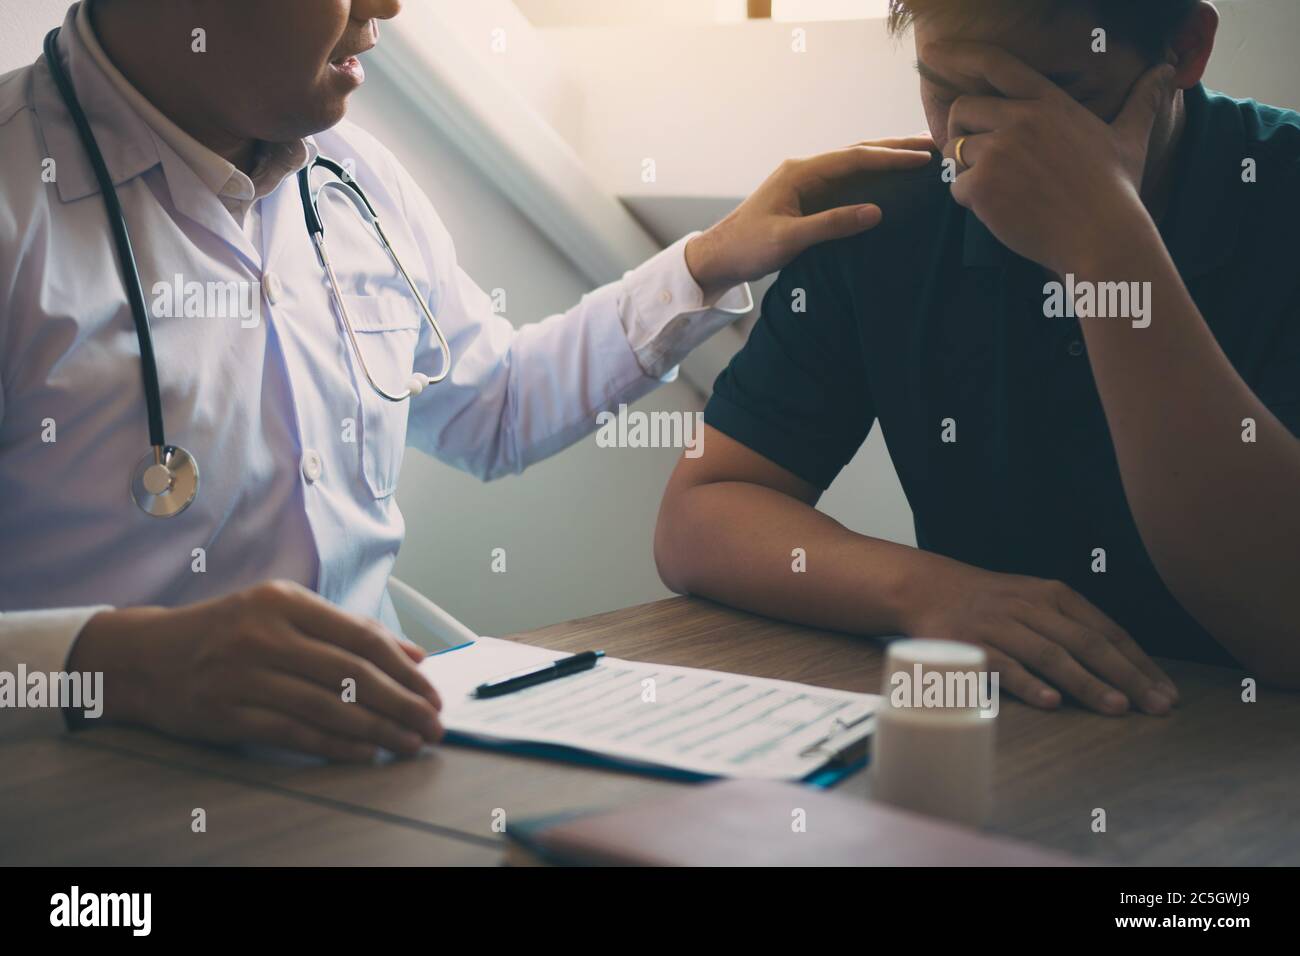 Doctor is comforting the patient after notifying the patient about the outcomes of treatment. Stock Photo